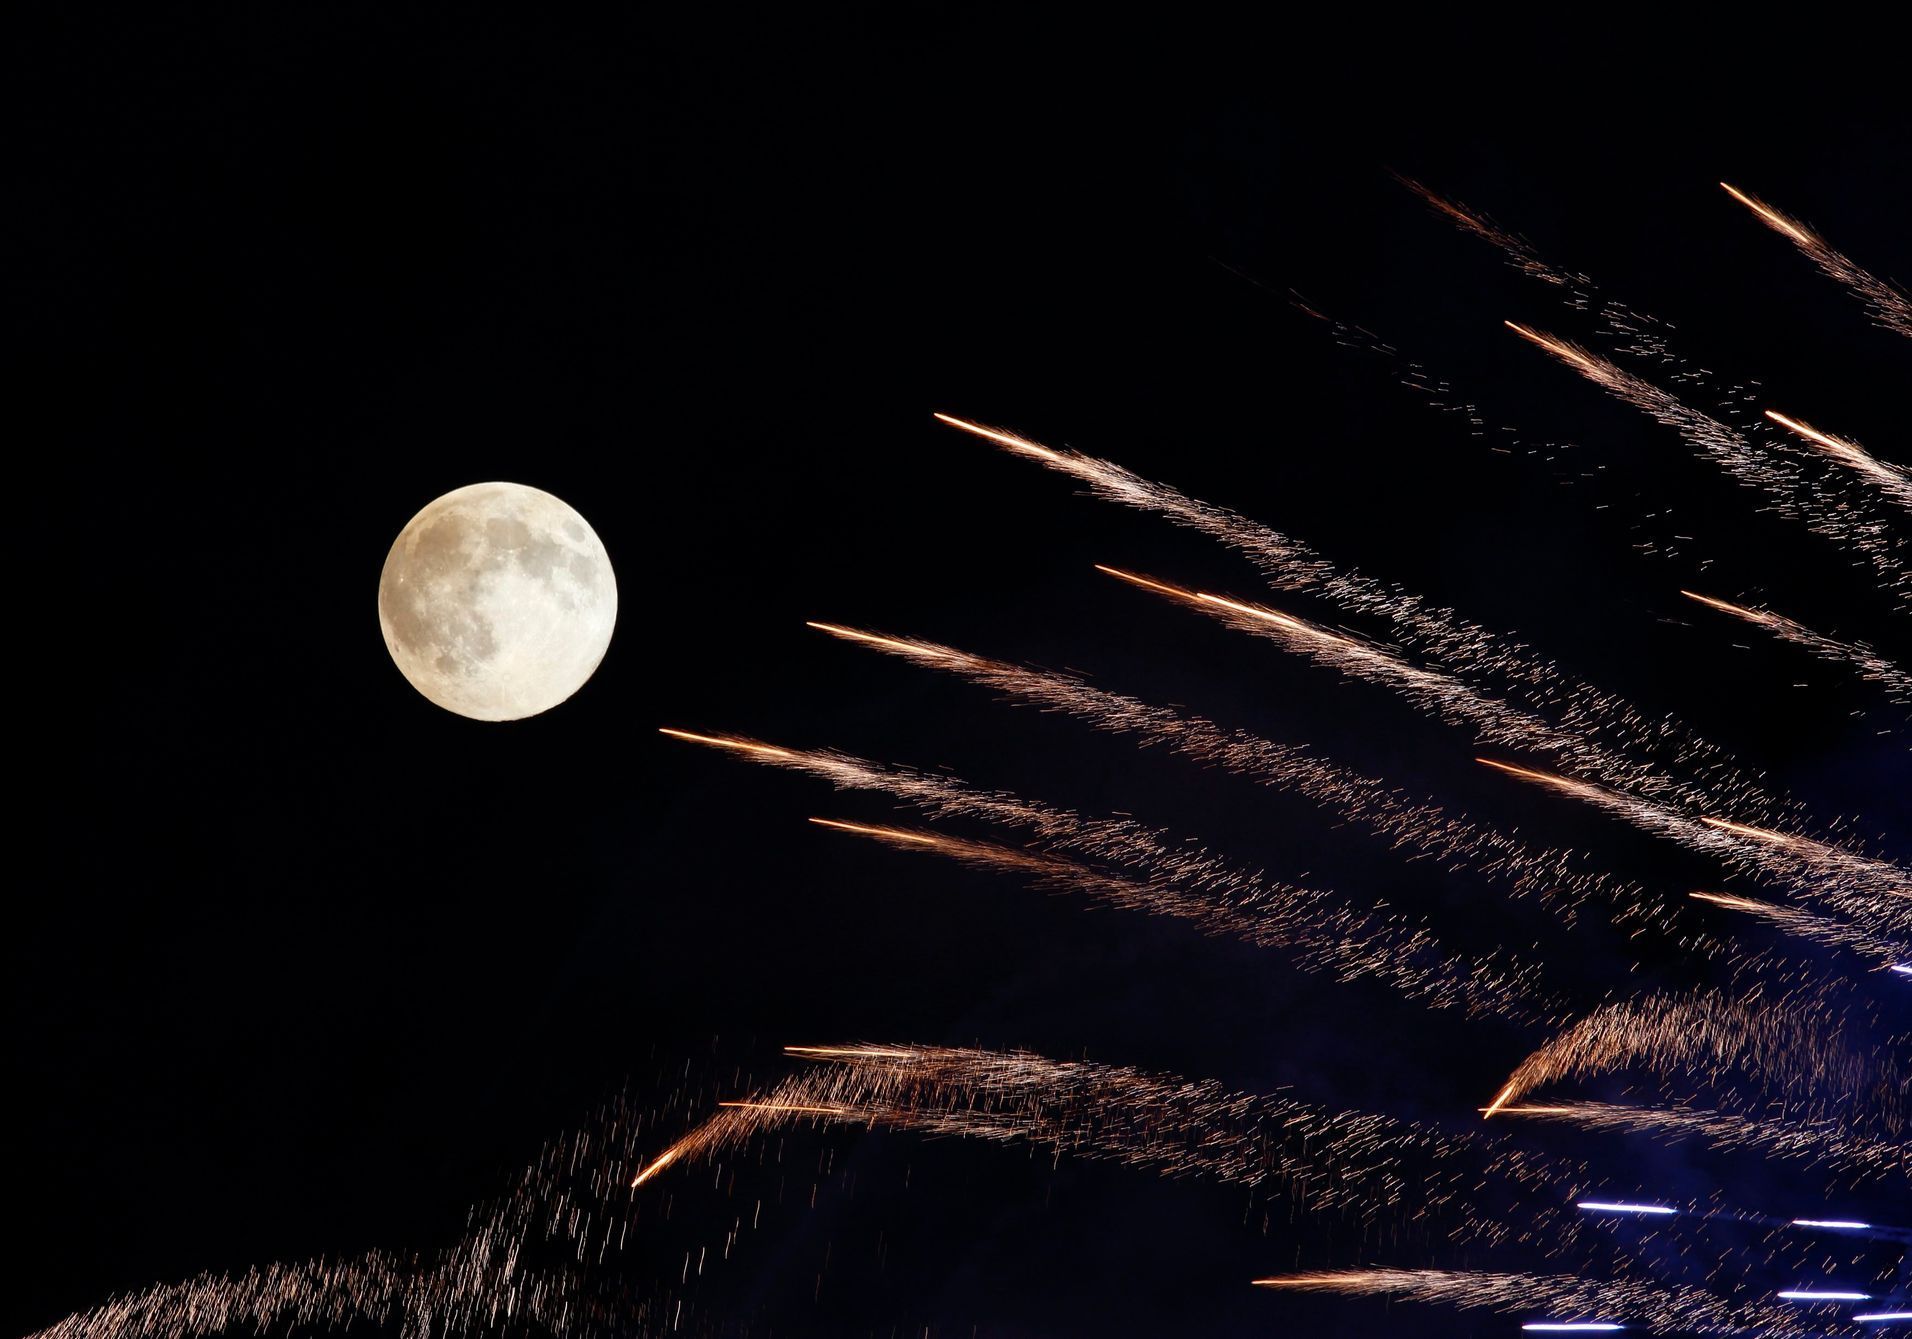 Fireworks streak past in front of the supermoon outside the town of Mosta